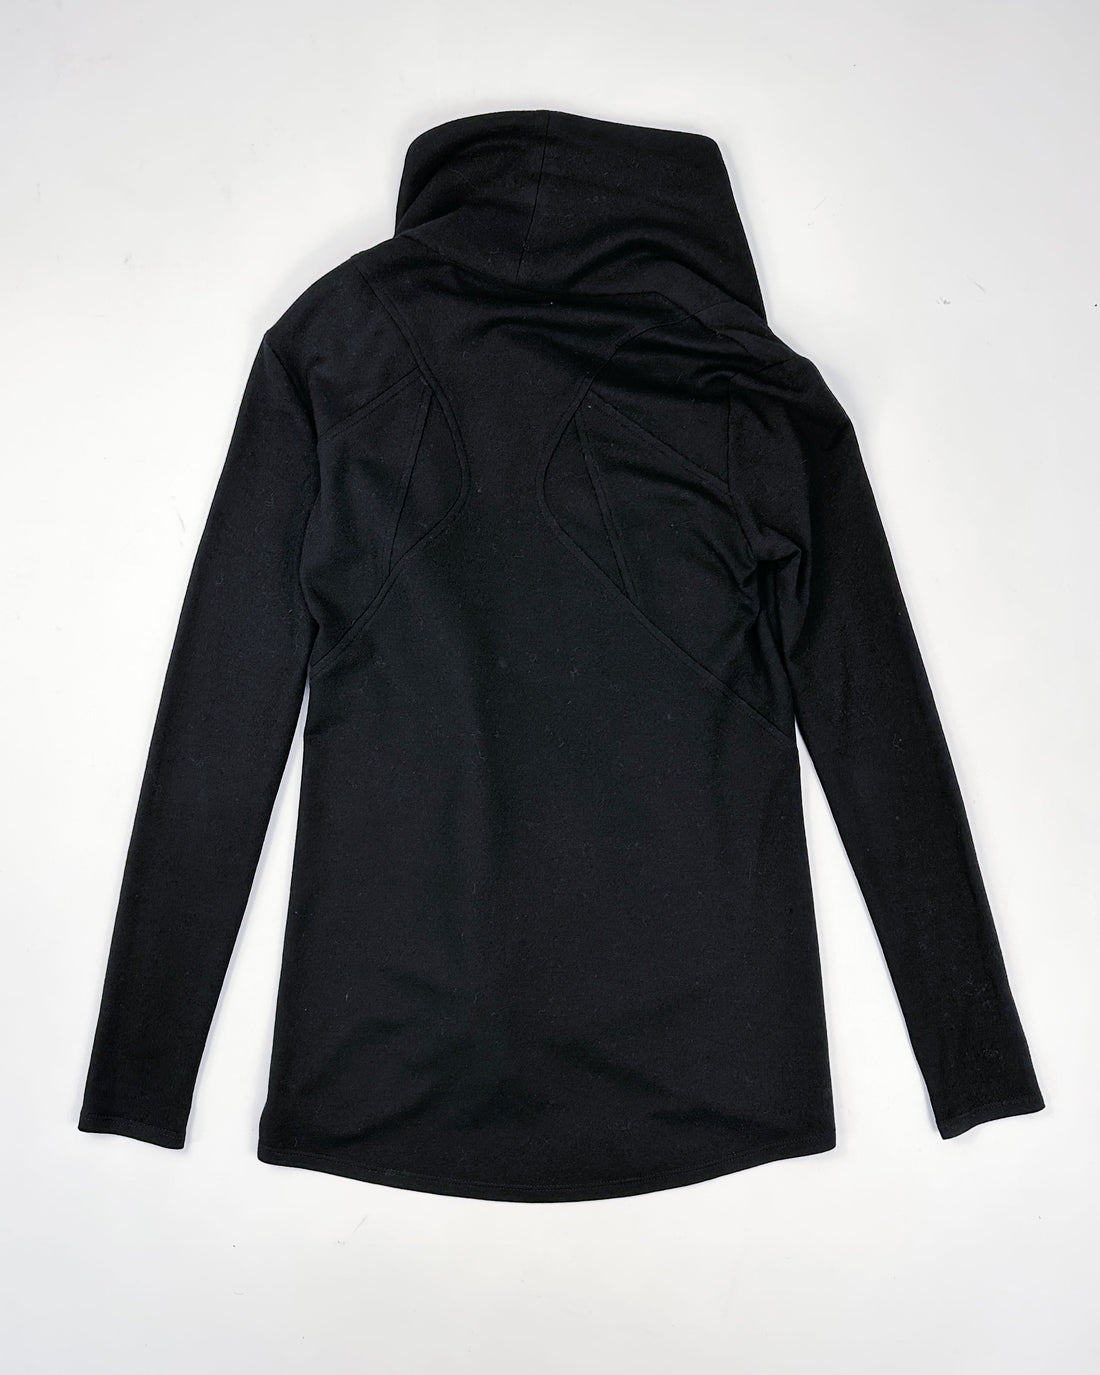 Helmut Lang Black Asymmetric Made In USA Jacket 1990's